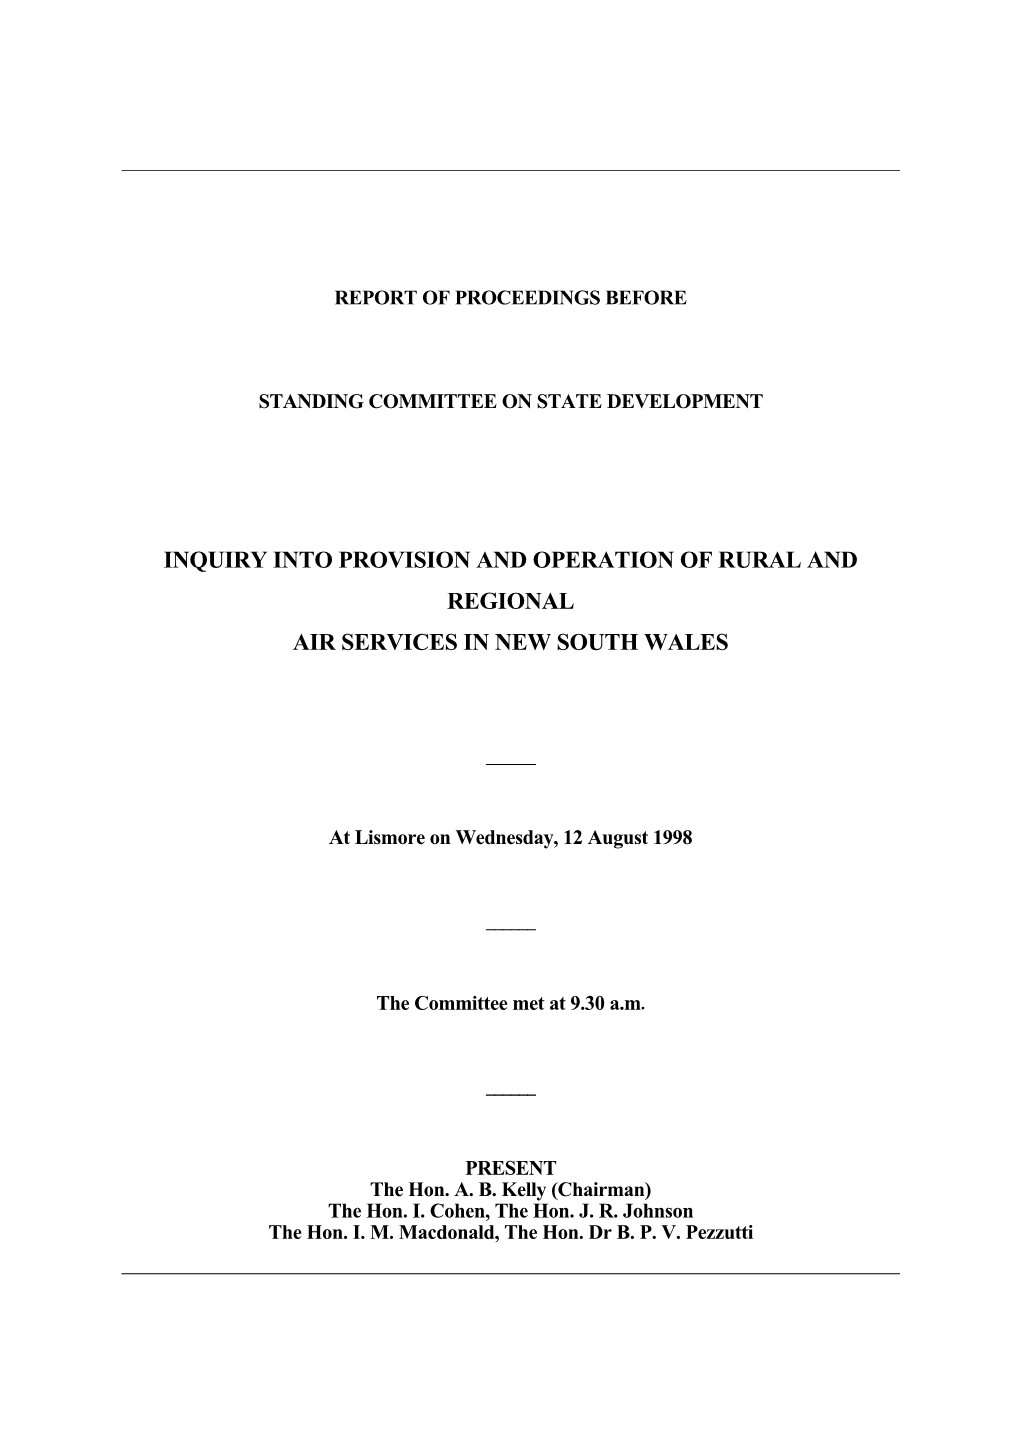 Inquiry Into Provision and Operation of Rural and Regional Air Services in New South Wales